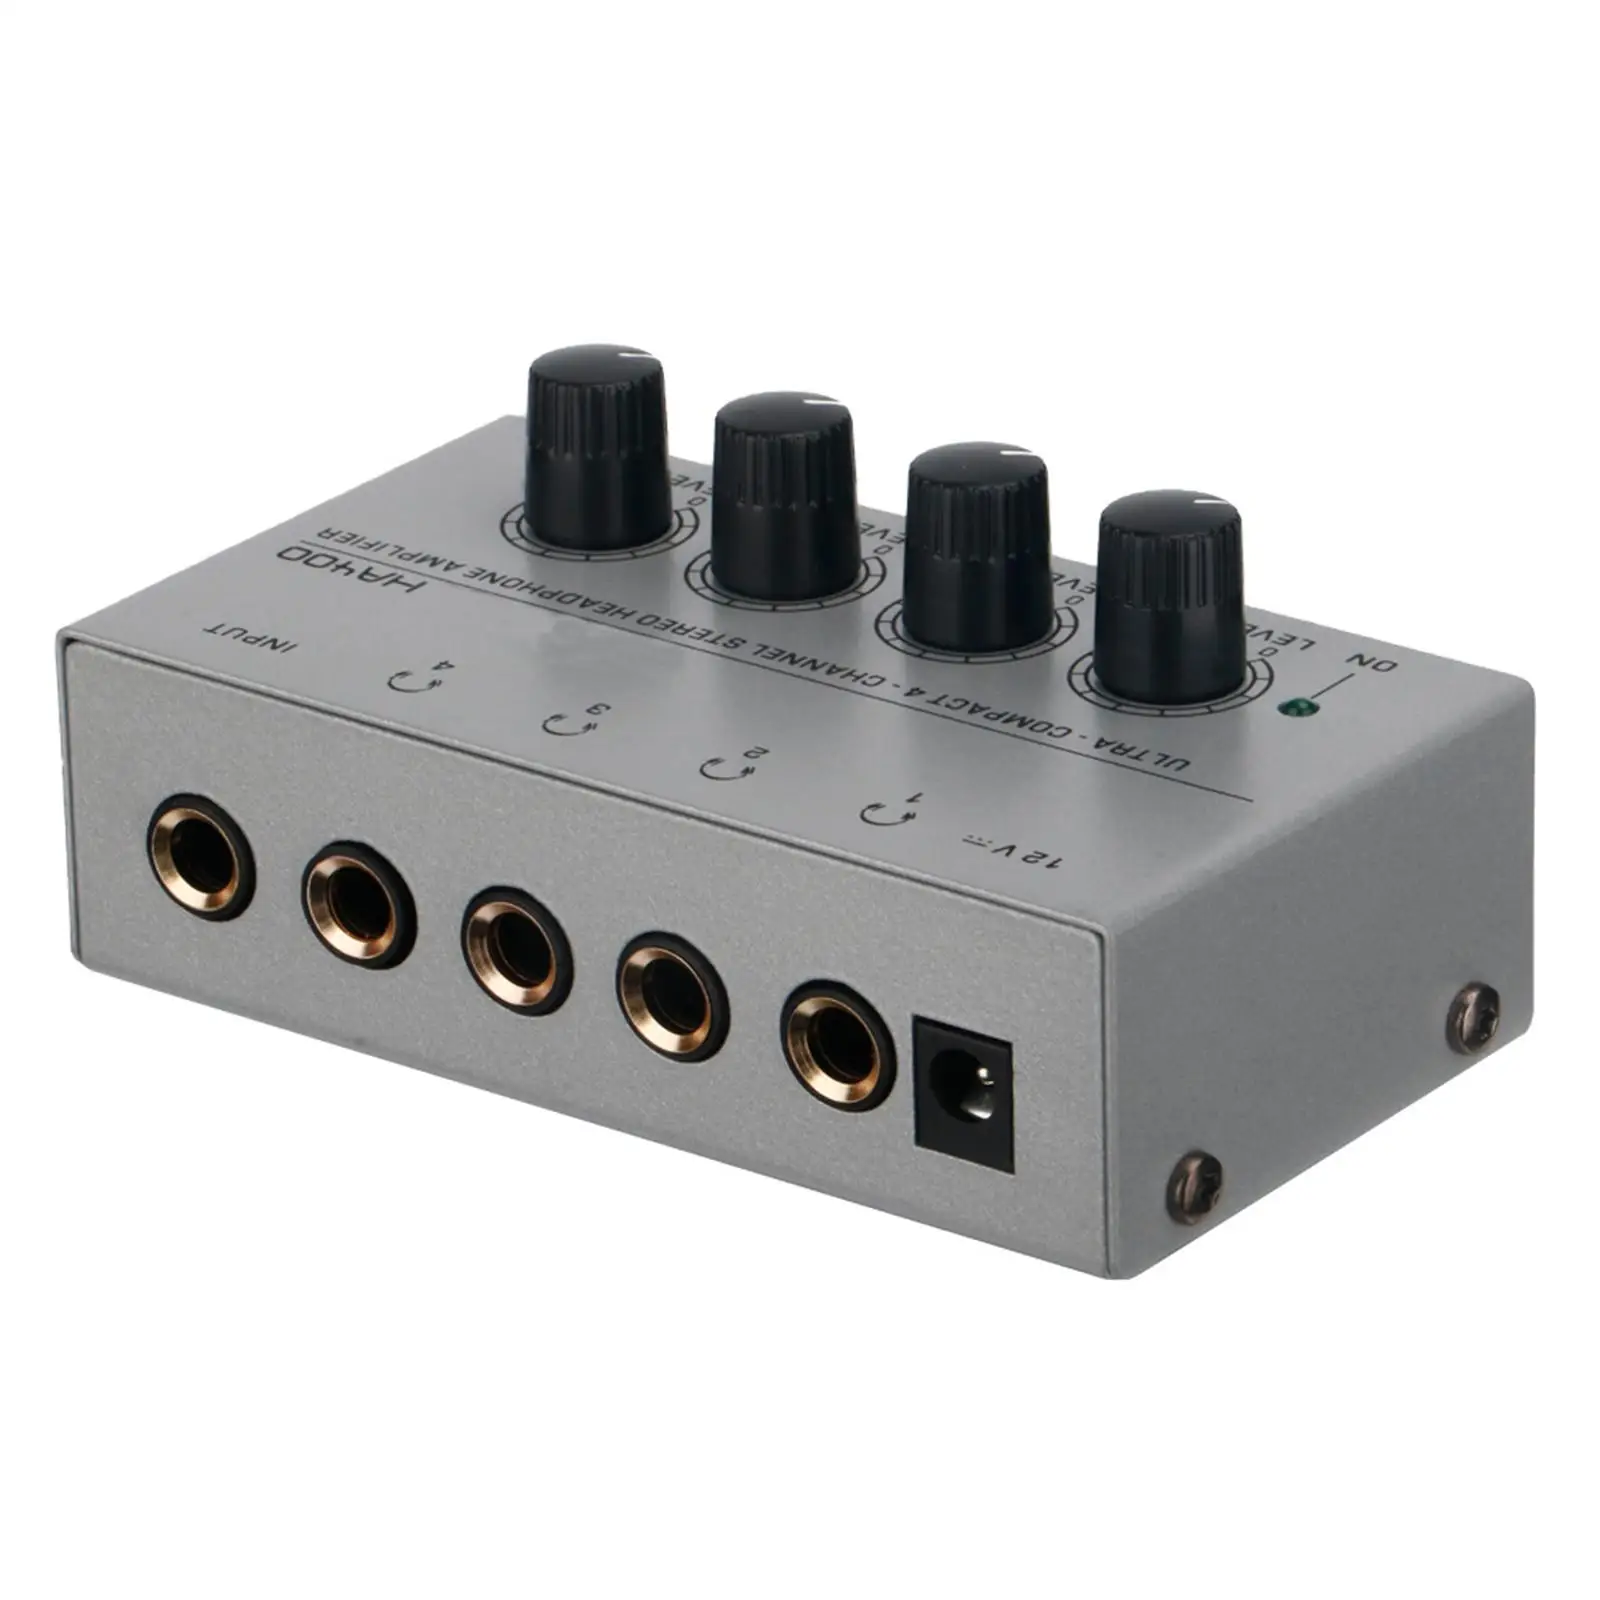 4 Output Headphone amp Mixer Loudspeaker Clear Sound Professional Low Noise Stereo for music Stage Performances